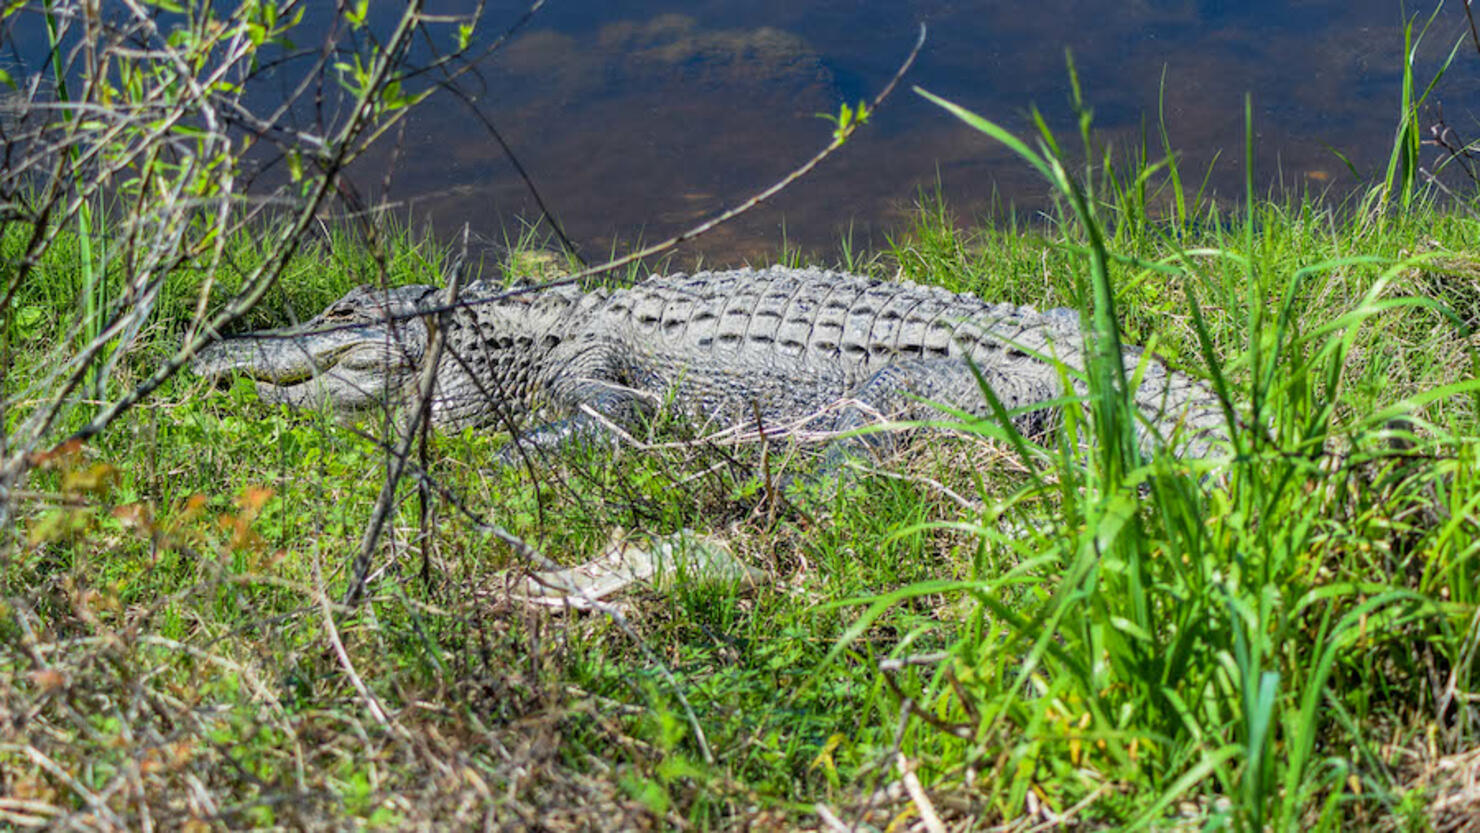 View Of Alligator In Water